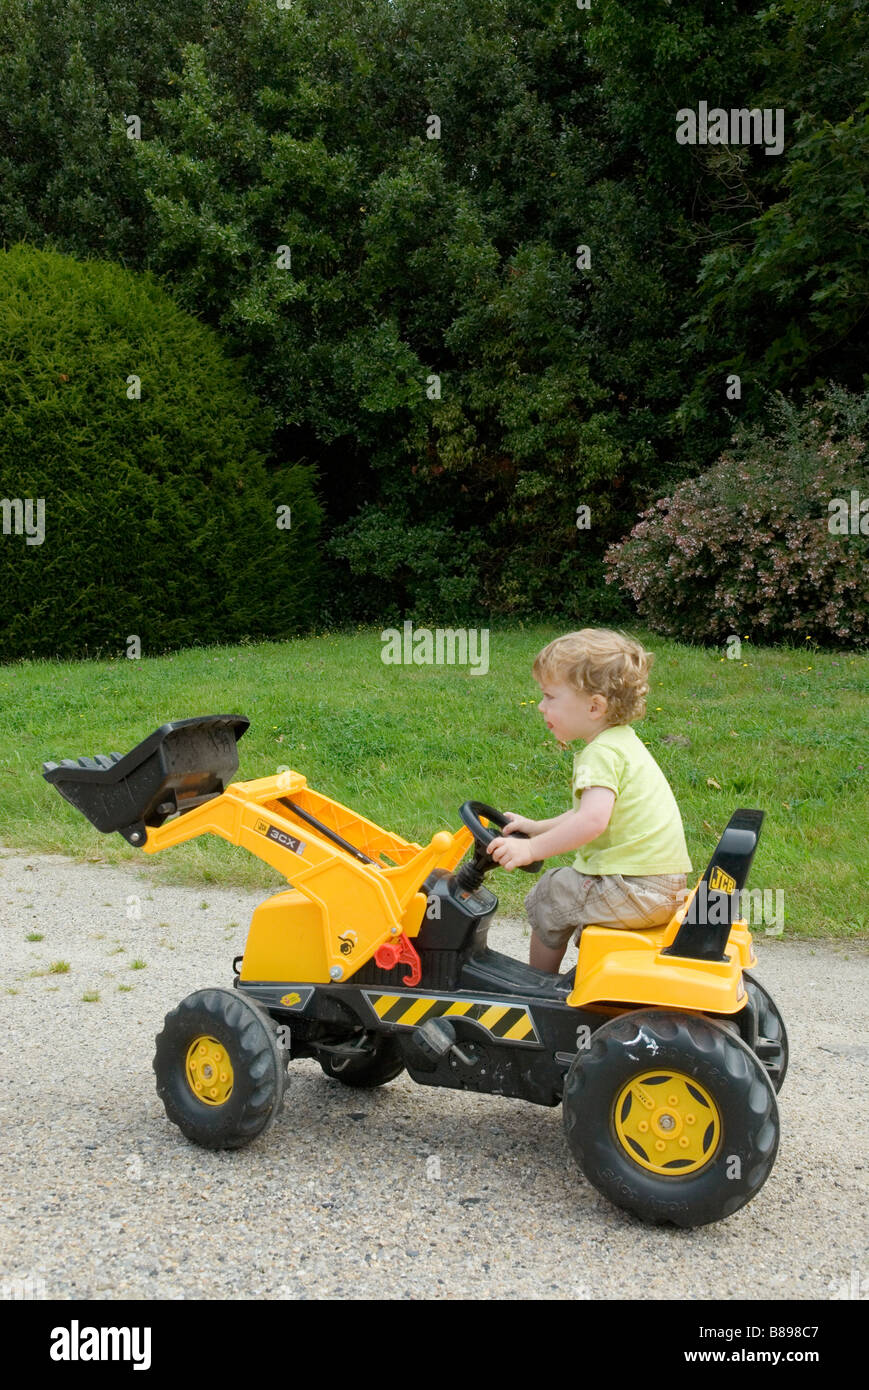 Young boy playing on yellow powered toy tractor Stock Photo